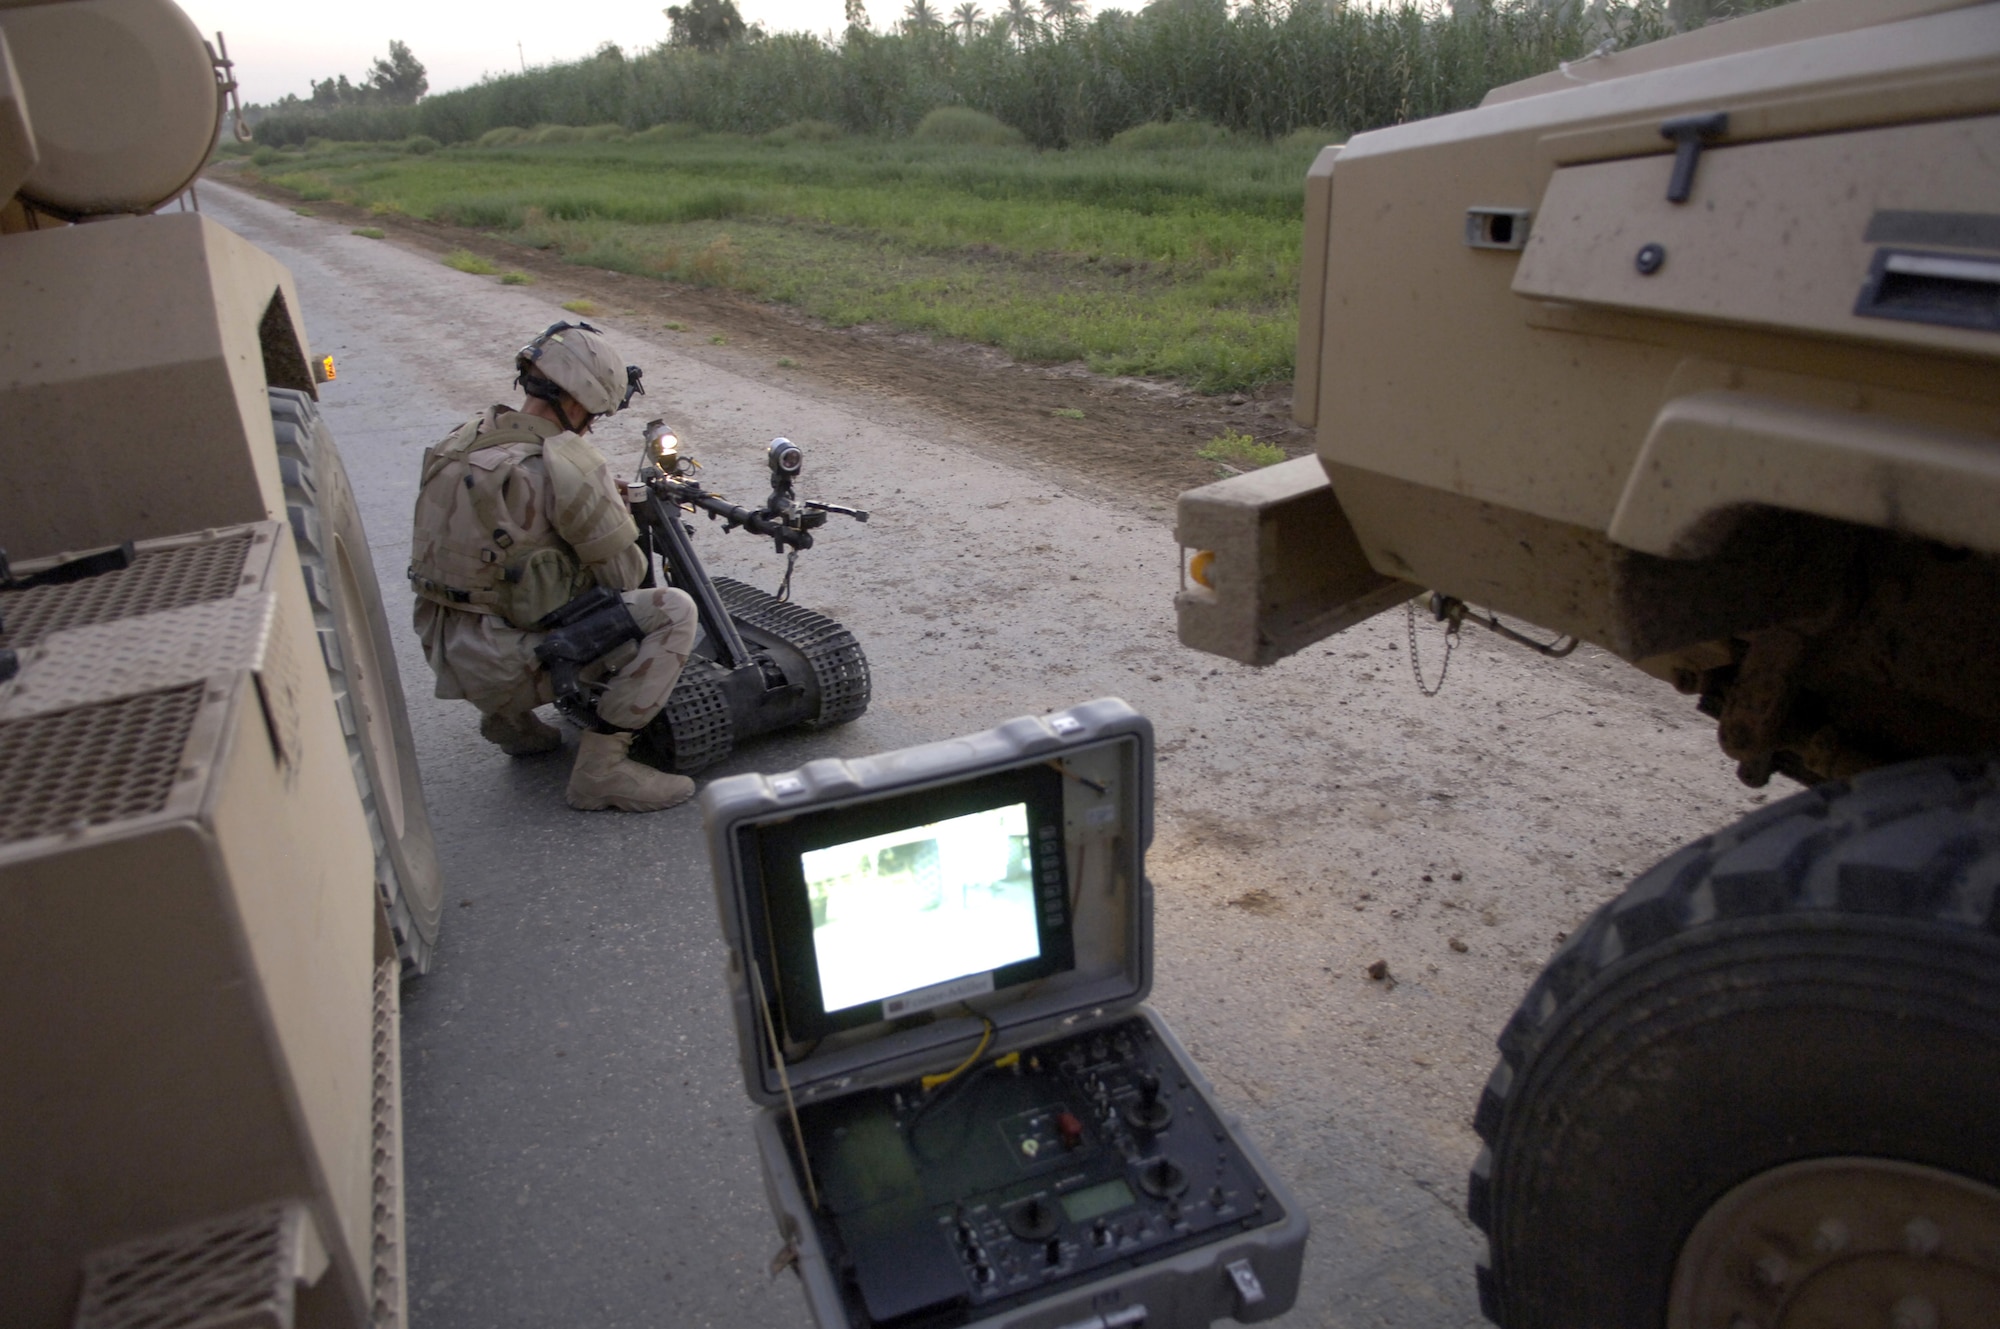 Senior Airman Scott White prepares a Talon robot before sending it to inspect a possible improvised explosive device, or IED, at a location southwest of Baghdad, Iraq, on Wednesday, June 28. The IED was found by an Army infantry unit. Airman White and two other explosive ordnance technicians were called to the scene to clear the area. Airman White is with the 447th Expeditionary Civil Engineer Squadron, and is deployed from Nellis Air Force Base, Nev. (U.S. Air Force photo/Senior Airman Brian Ferguson) 
